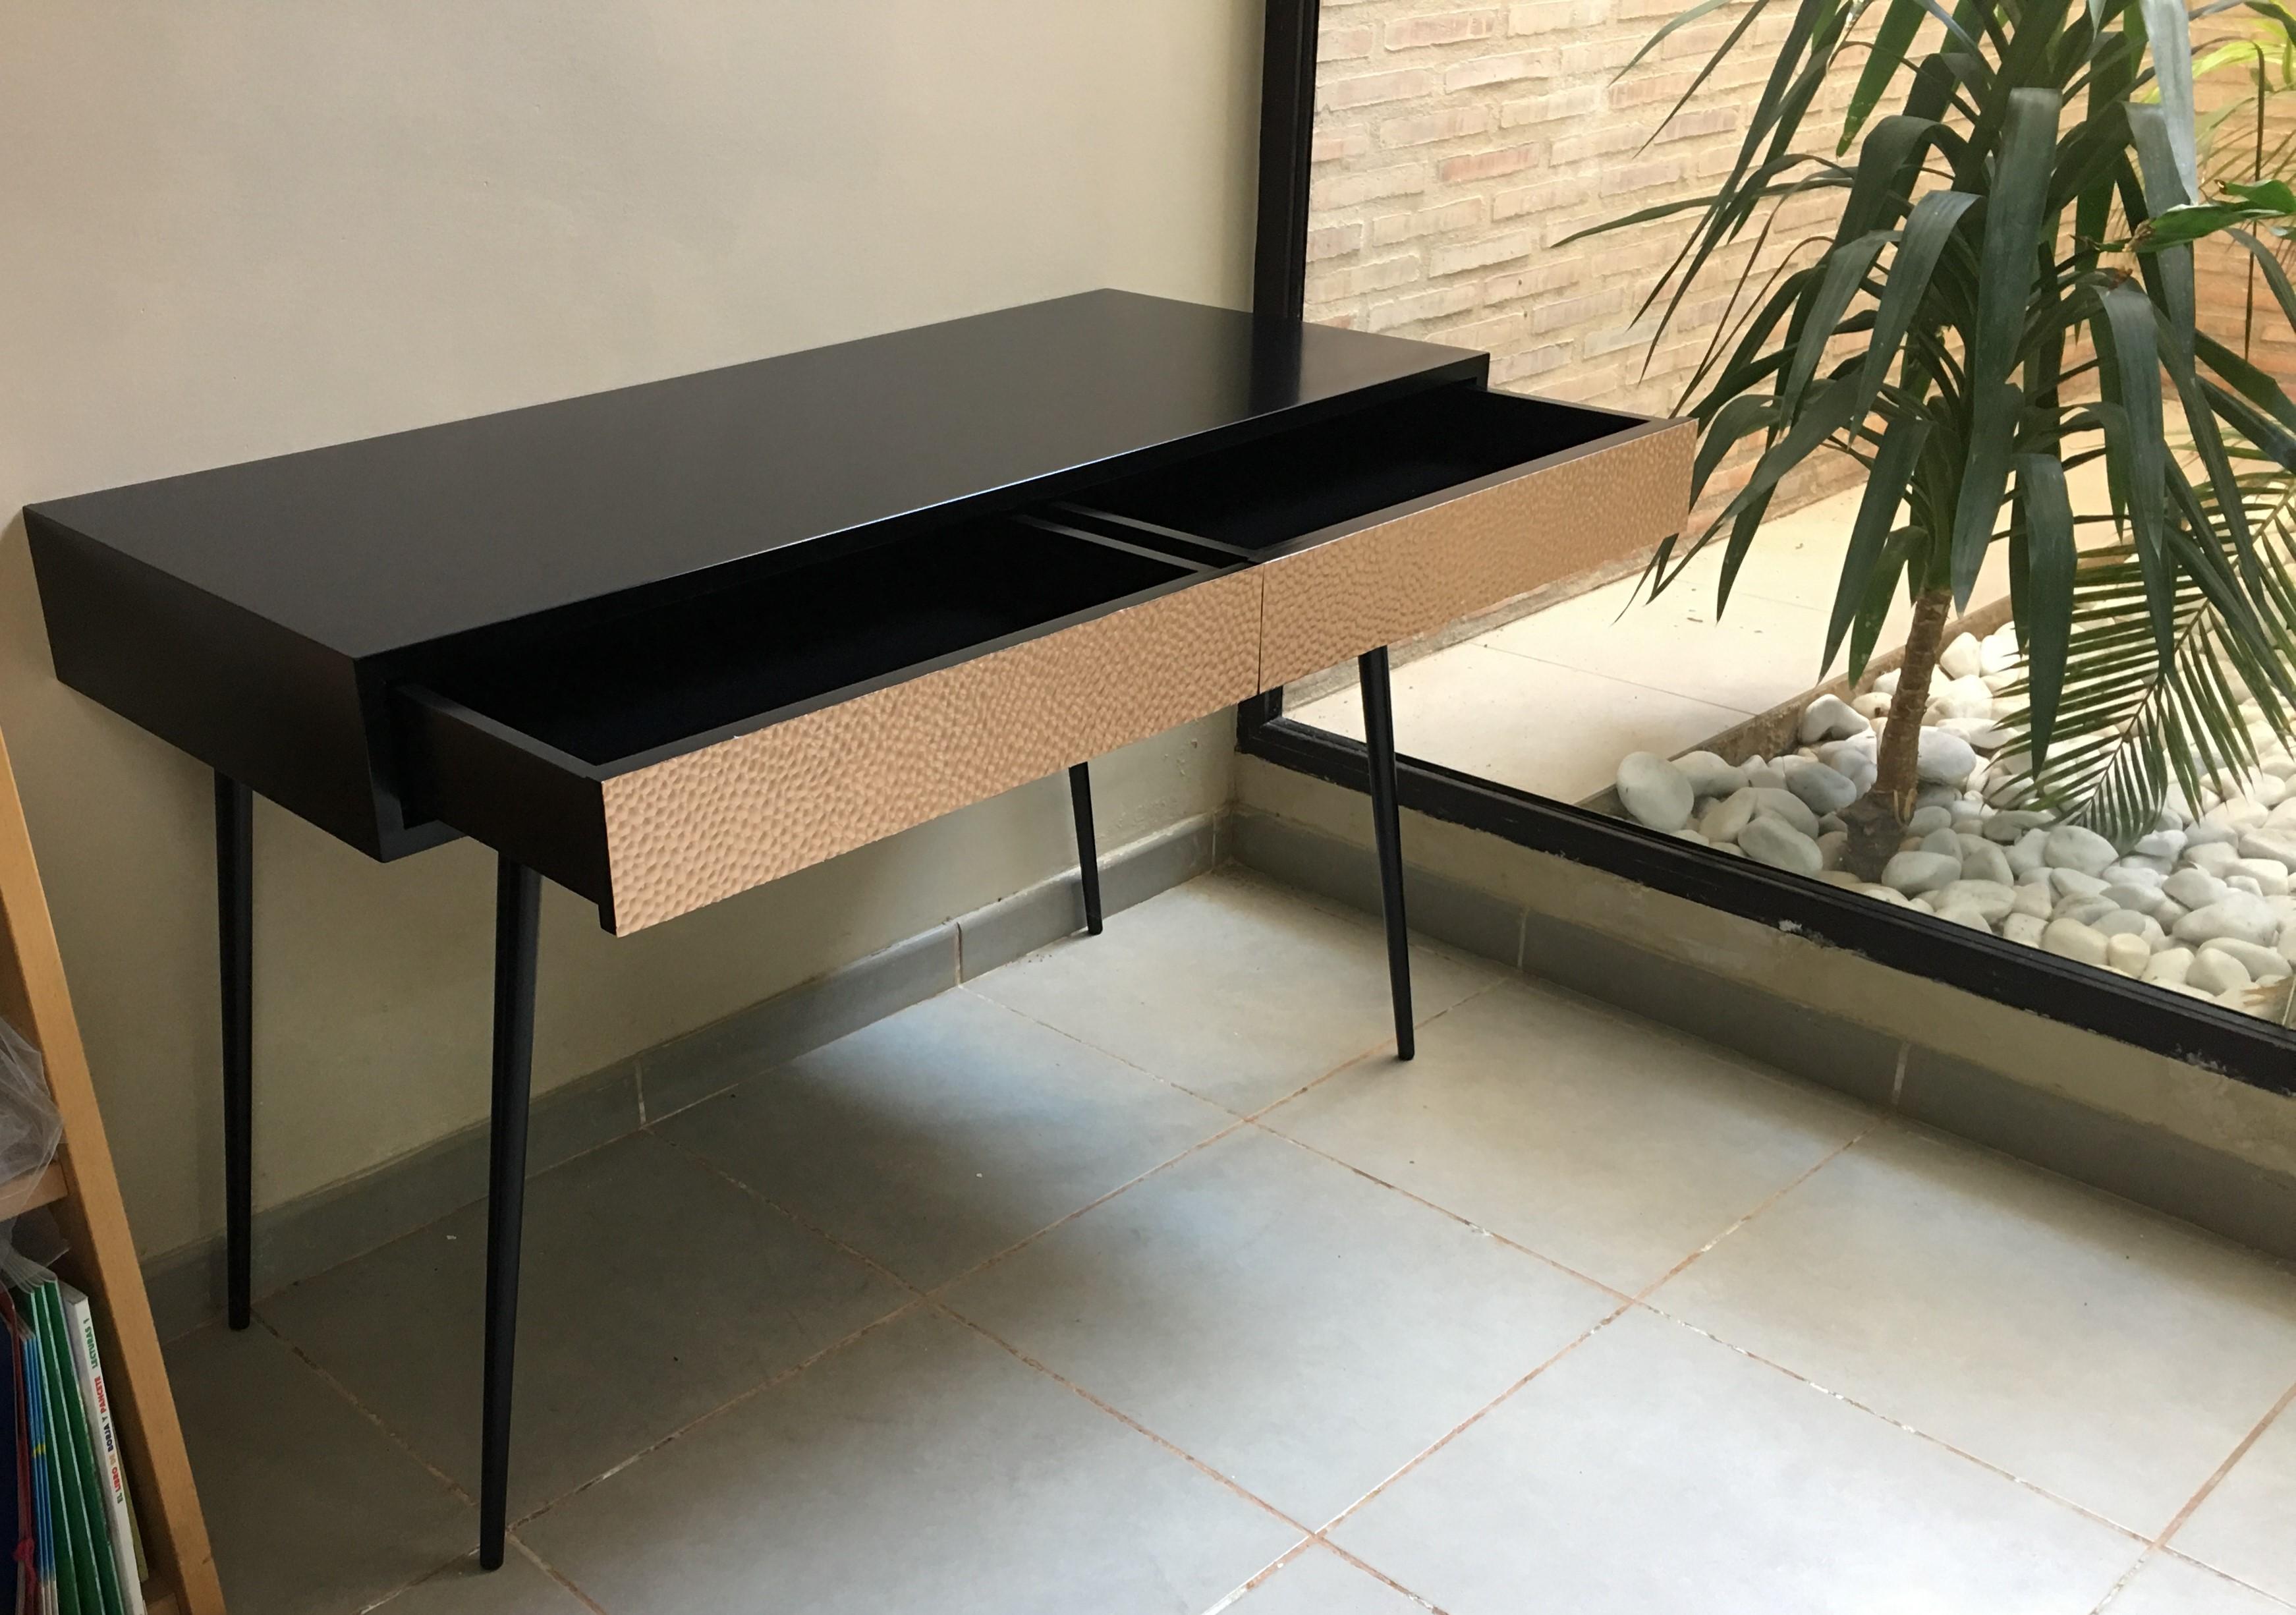 Spanish New Pink Relief Metal and Black Lacquered Wood Desk Table with Two Drawers